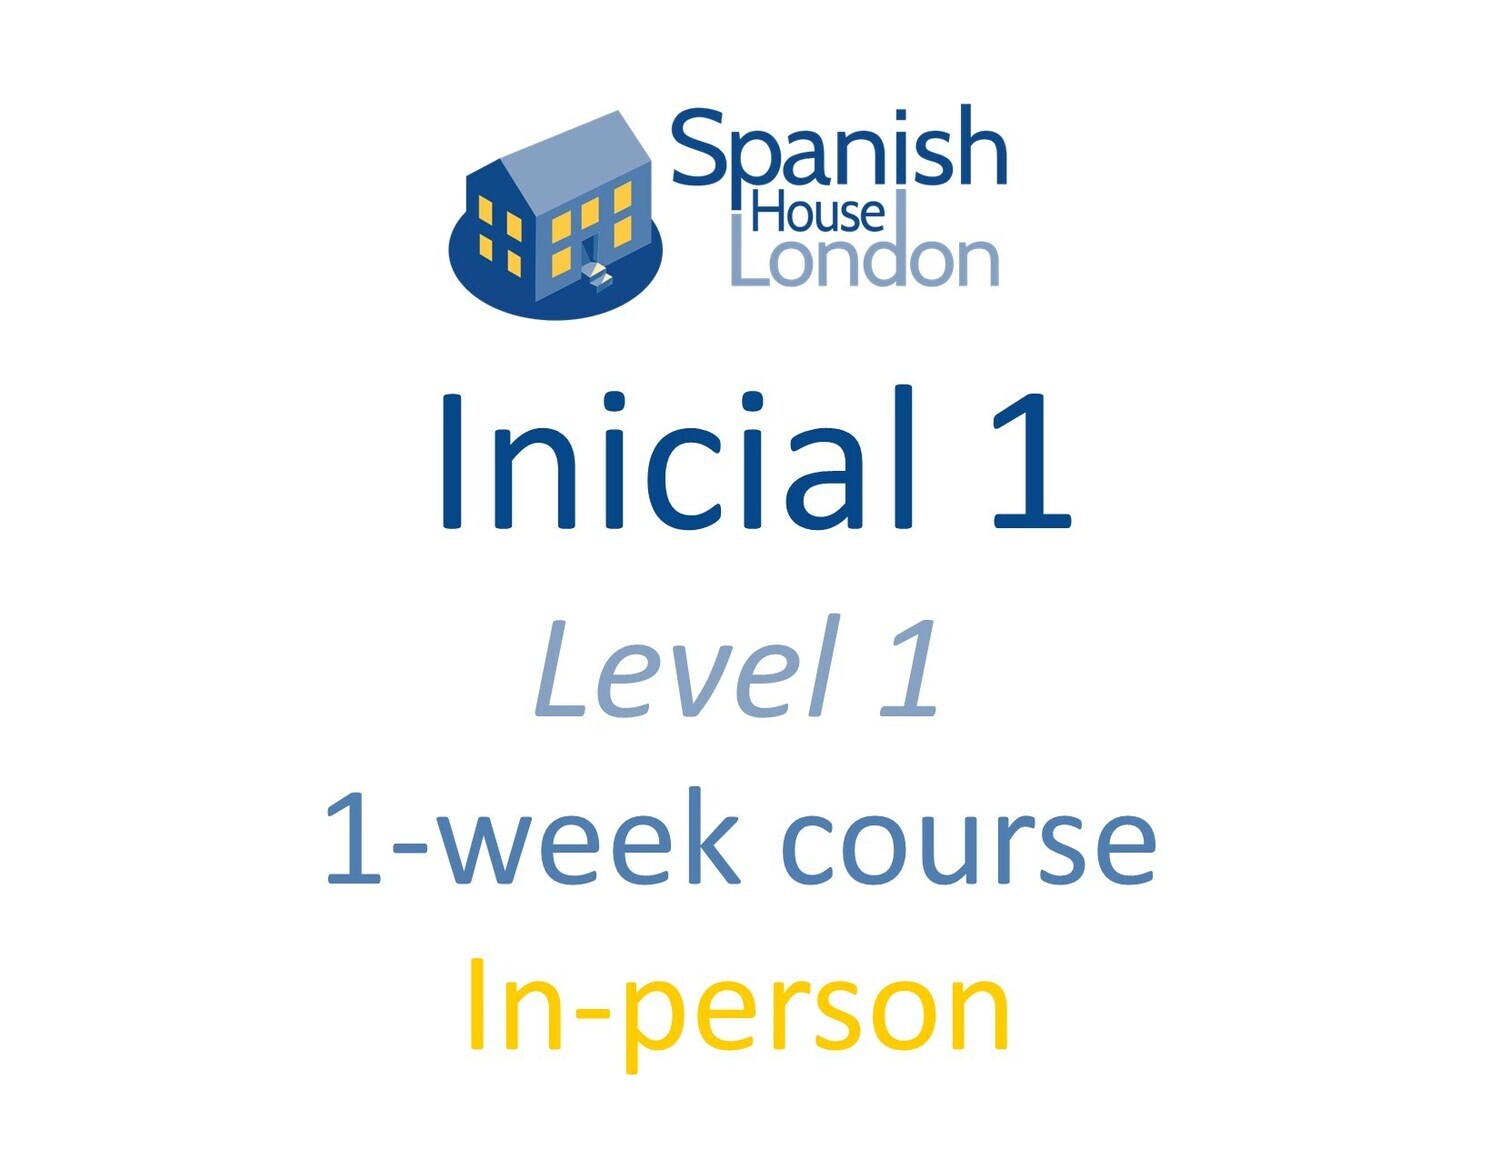 One-Week Intensive Inicial 1 Course starting on 16th October at 10.30am in Clapham North